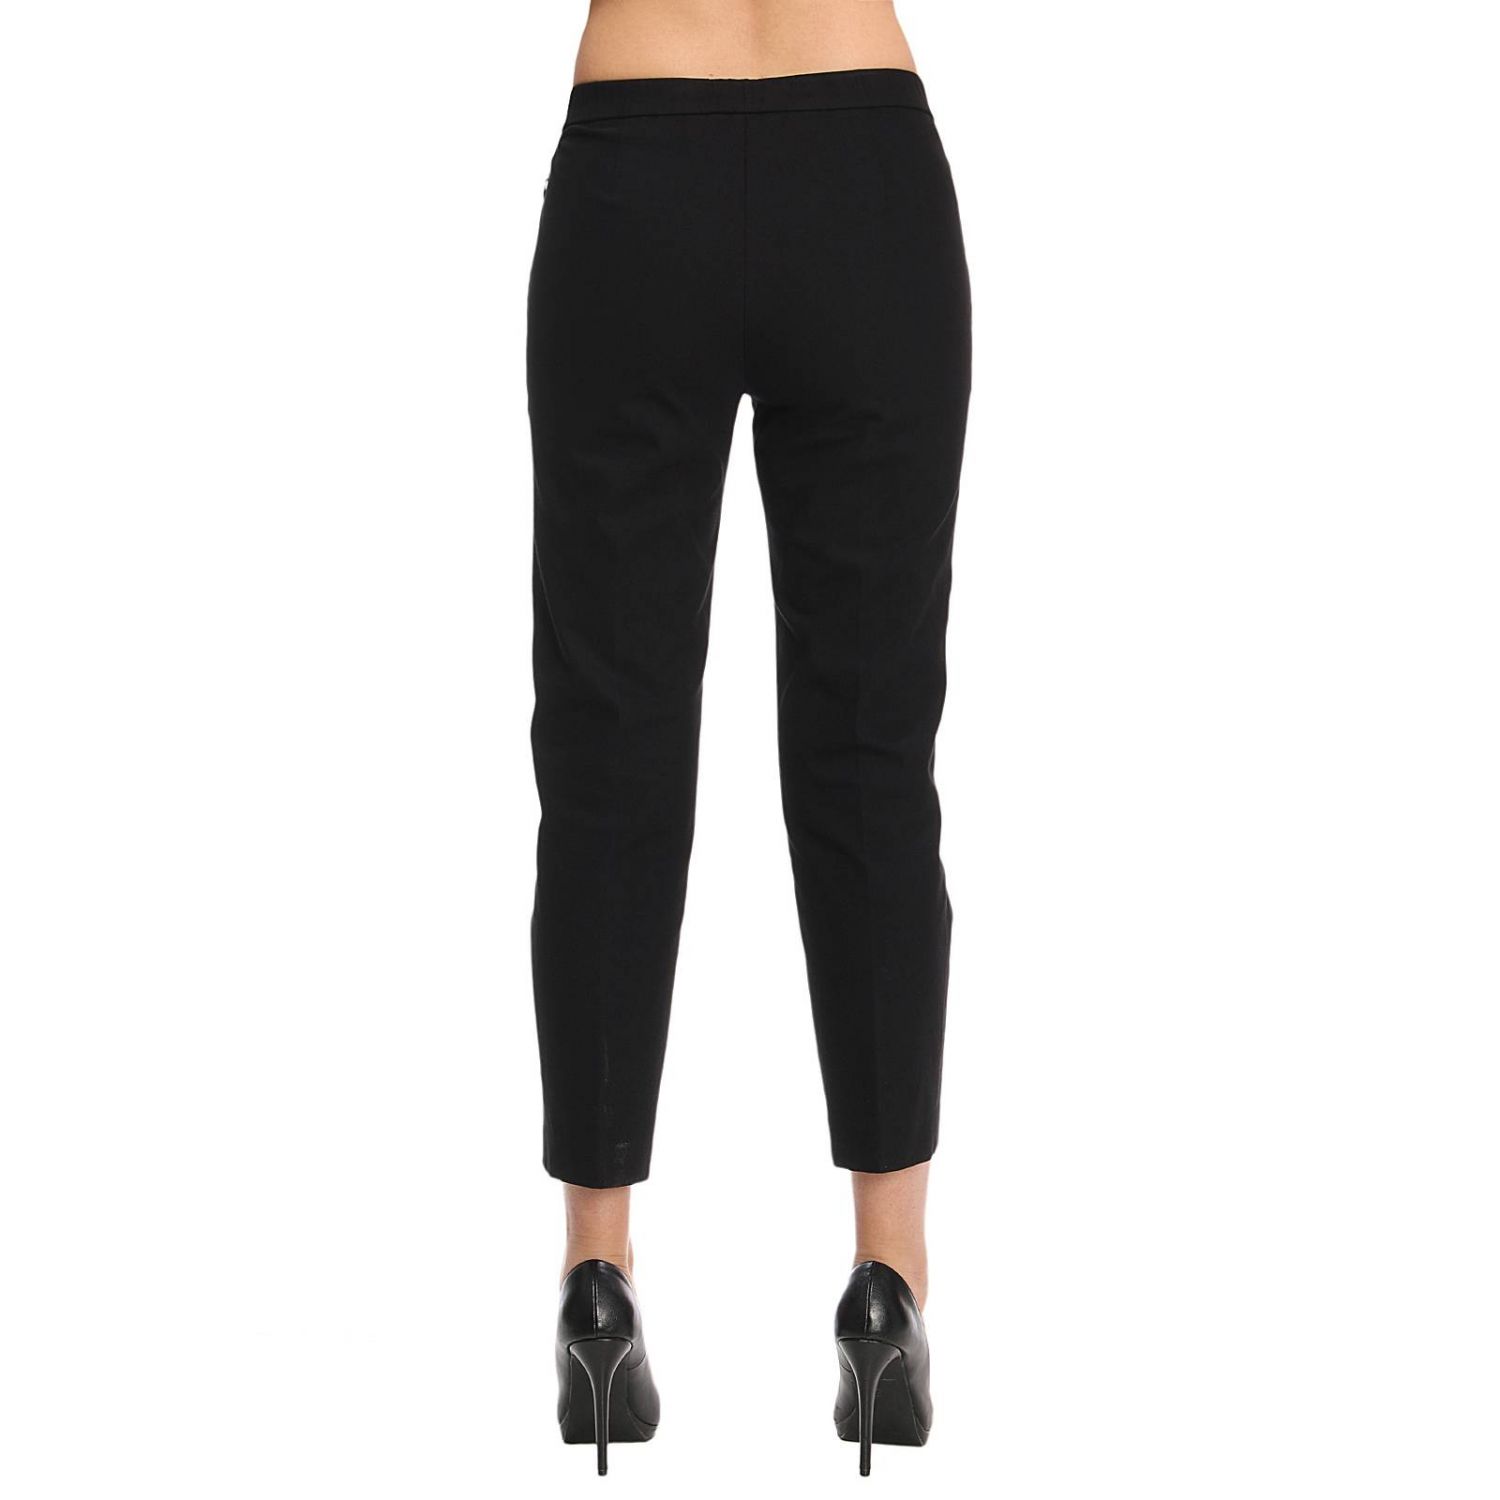 Theory Outlet: Pants women - Black | Pants Theory 104213 GIGLIO.COM